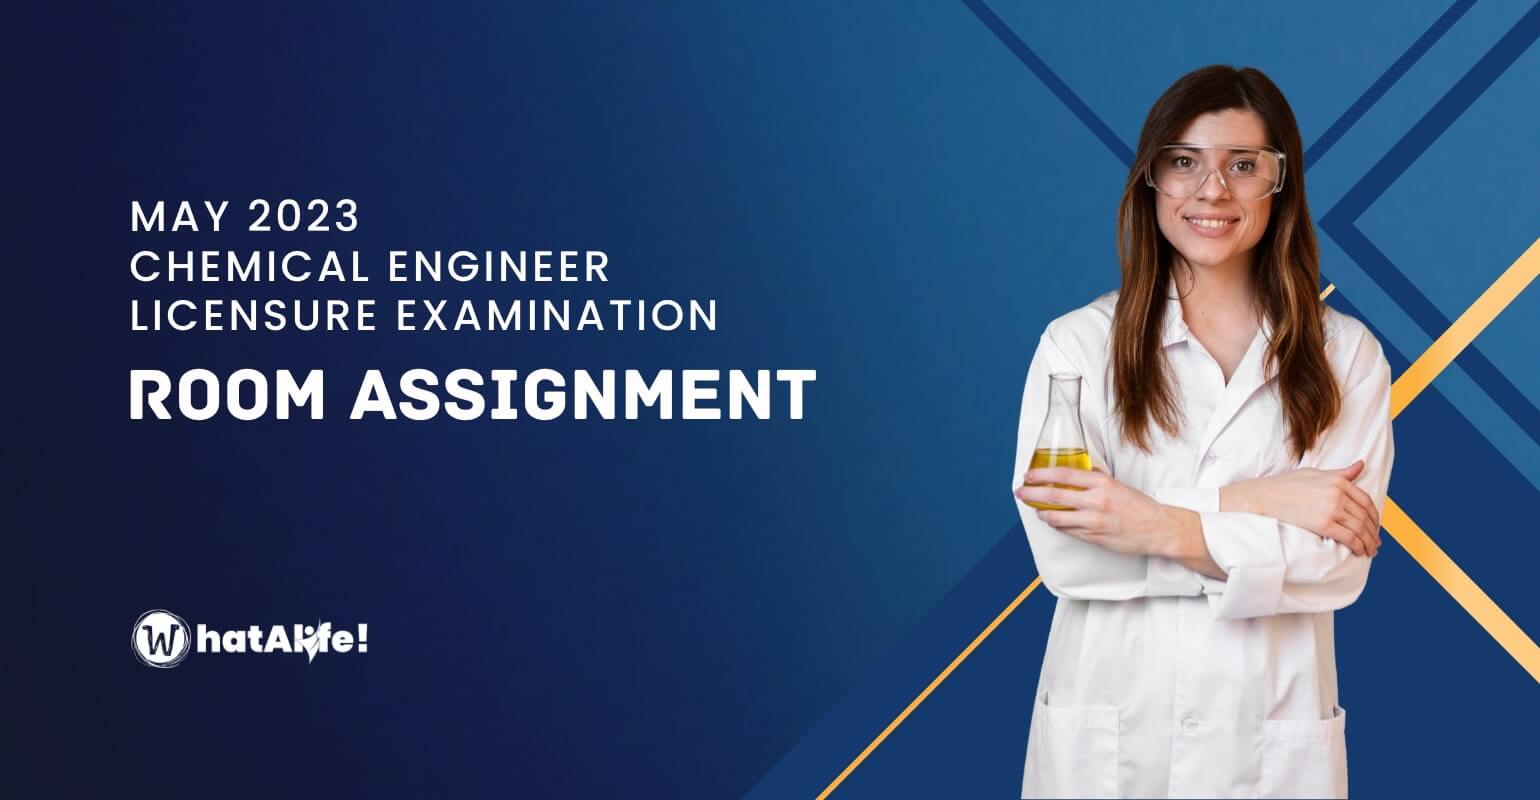 room assignment may 2023 chemical engineering licensure exam